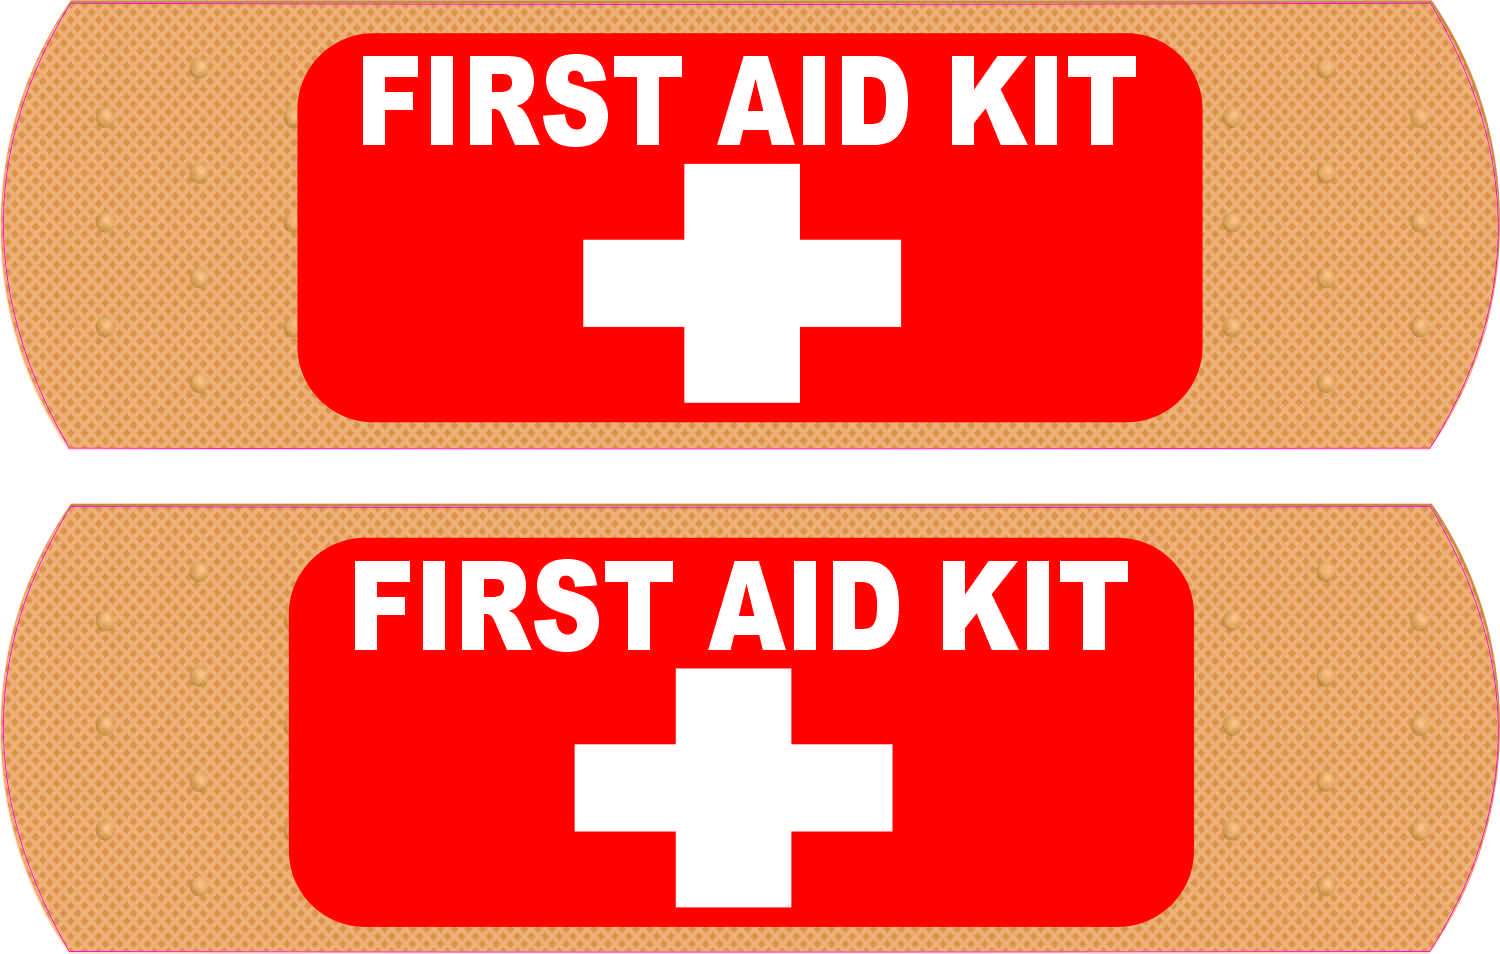 StickerTalk Bandage First Aid Kit Vinyl Stickers, 5 inches x 1.5 inches